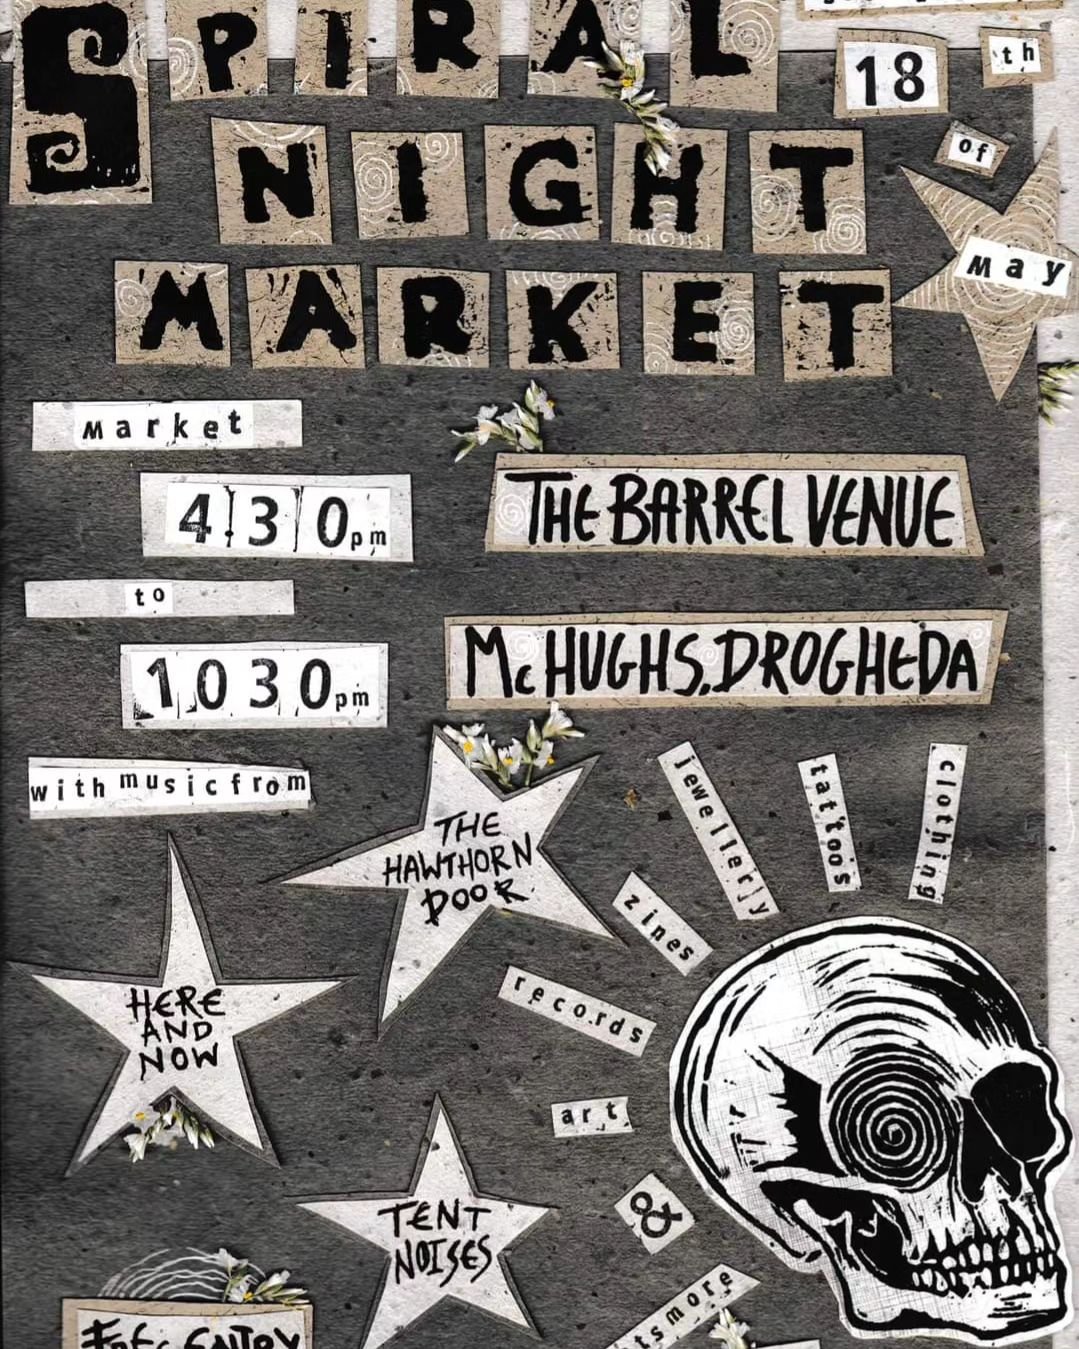 This Saturday evening pop down to the cool kids and see us trading at the @spiral_nights in @mchughs_venue 4.30 til 10.30 ❤️❤️